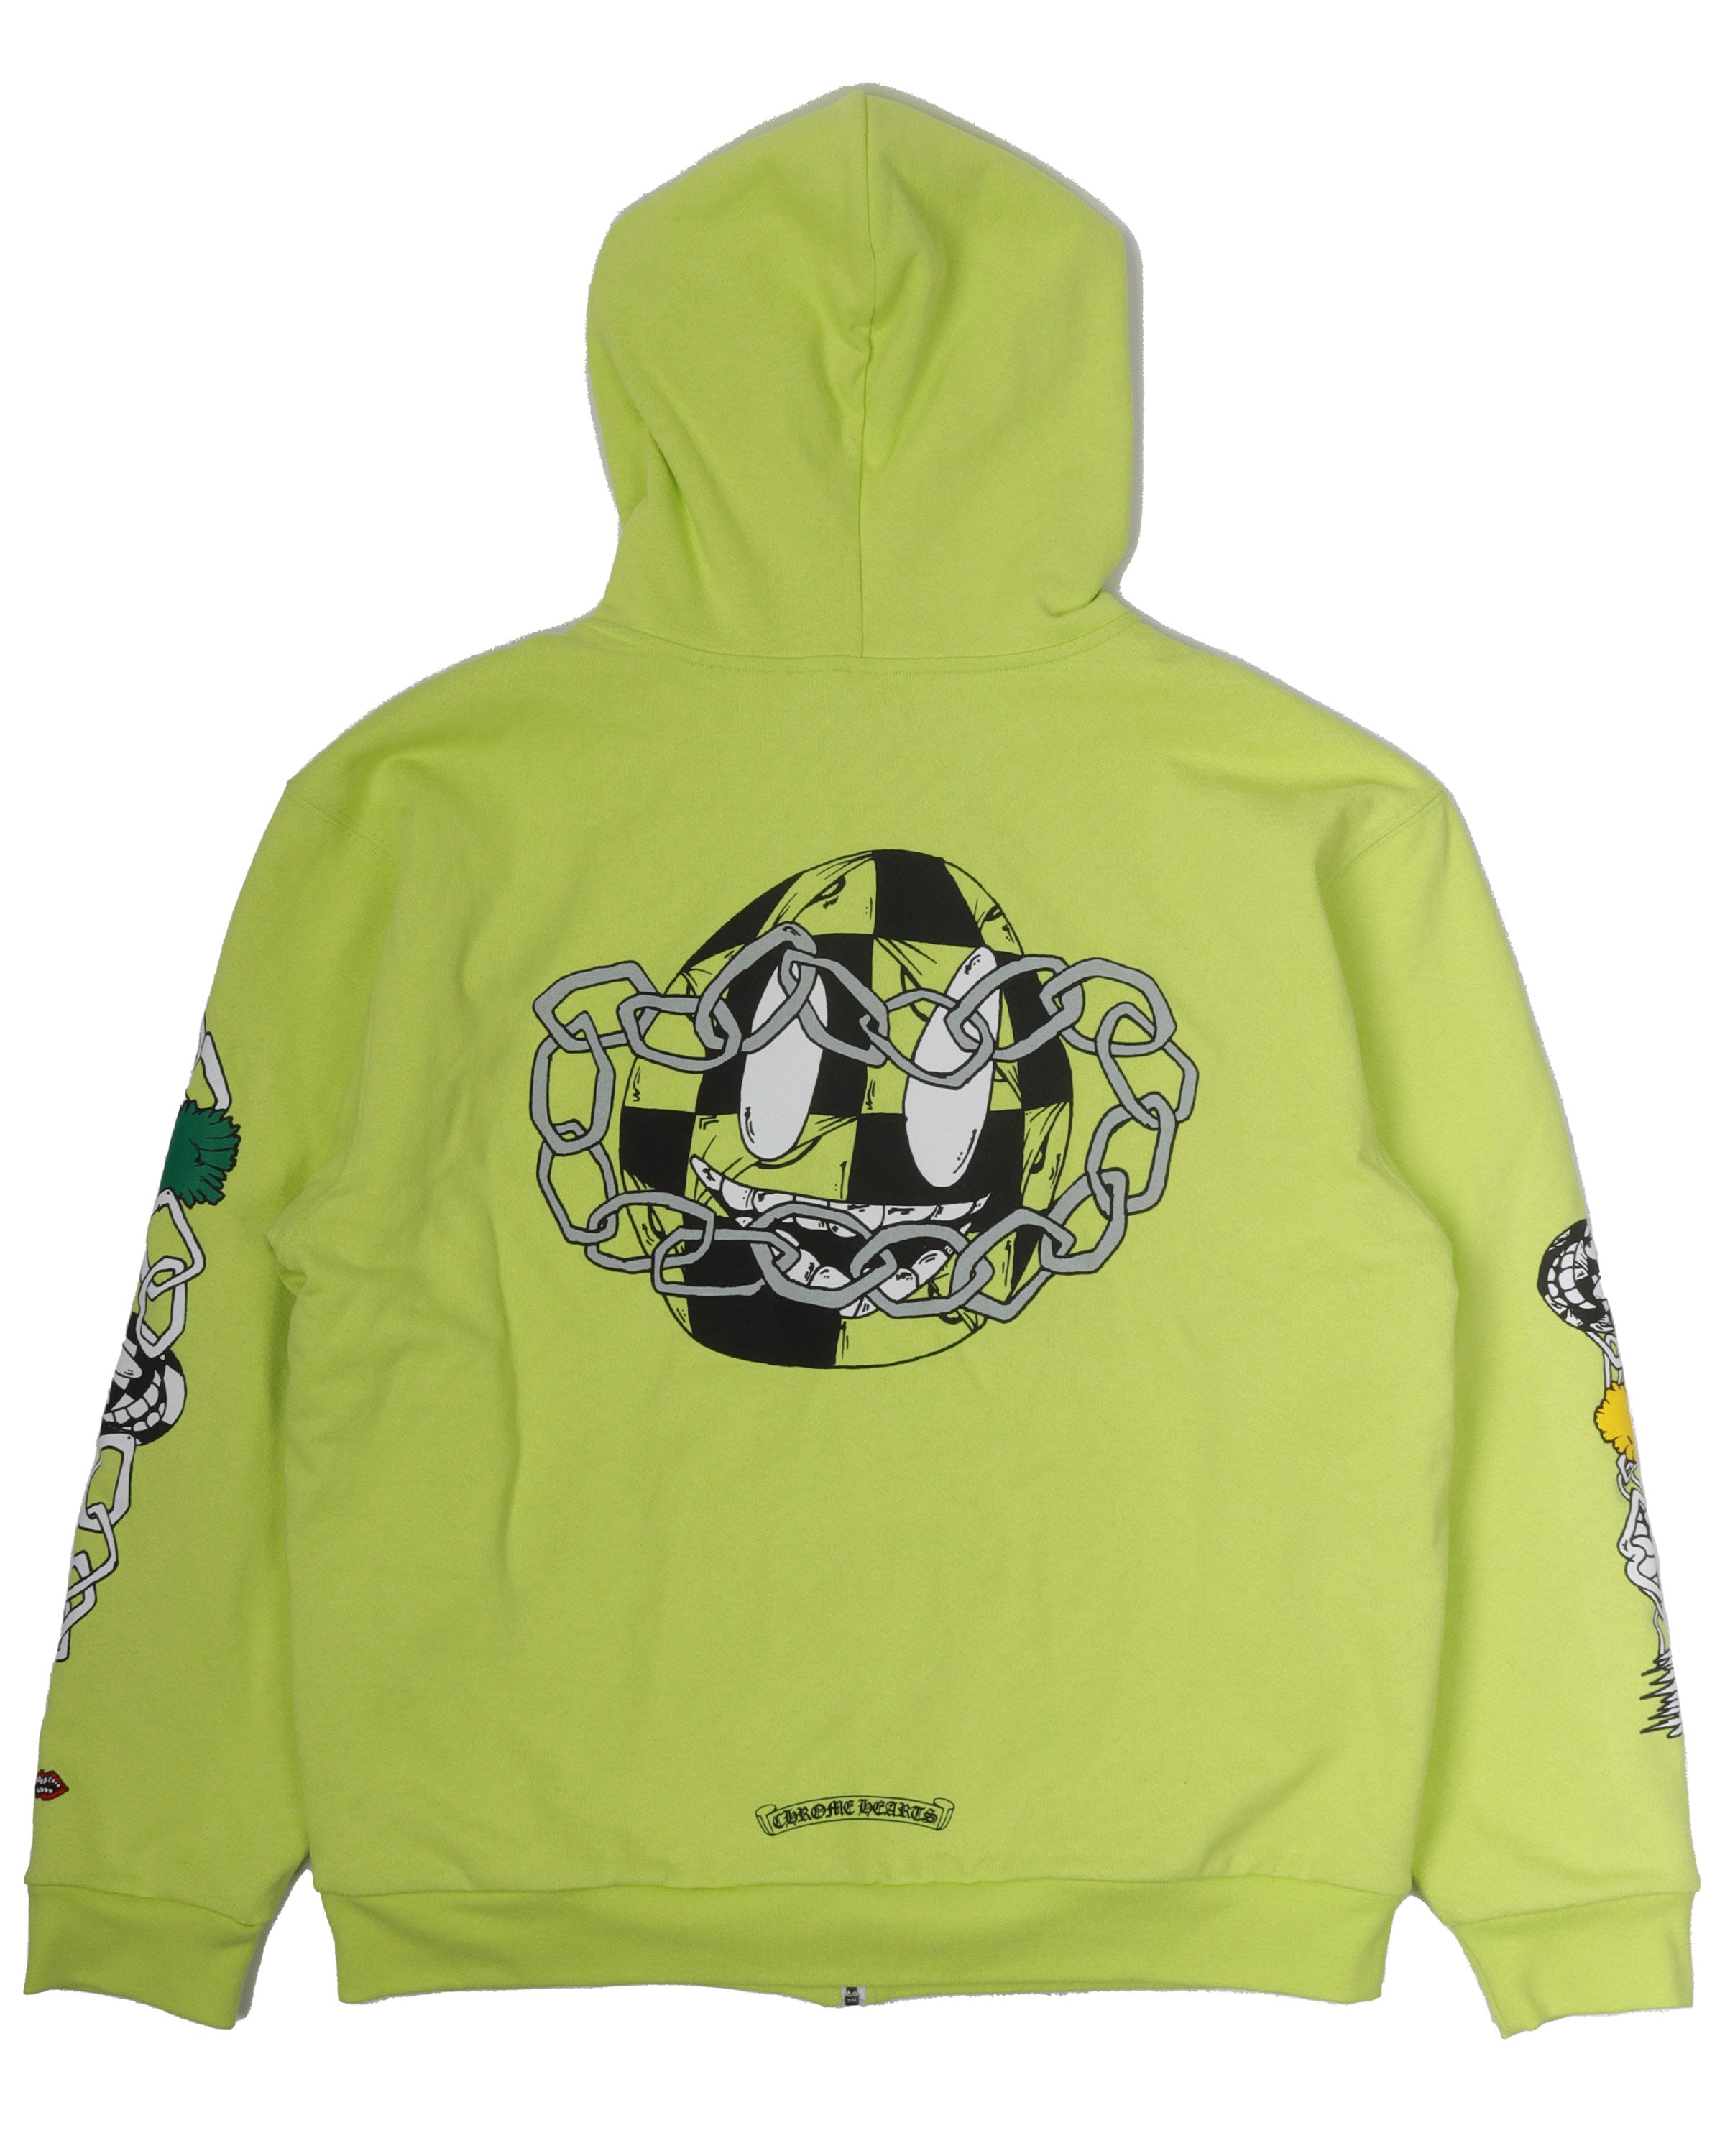 Matty Boy Thermal Lined Lime Green Zip Up Hoodie